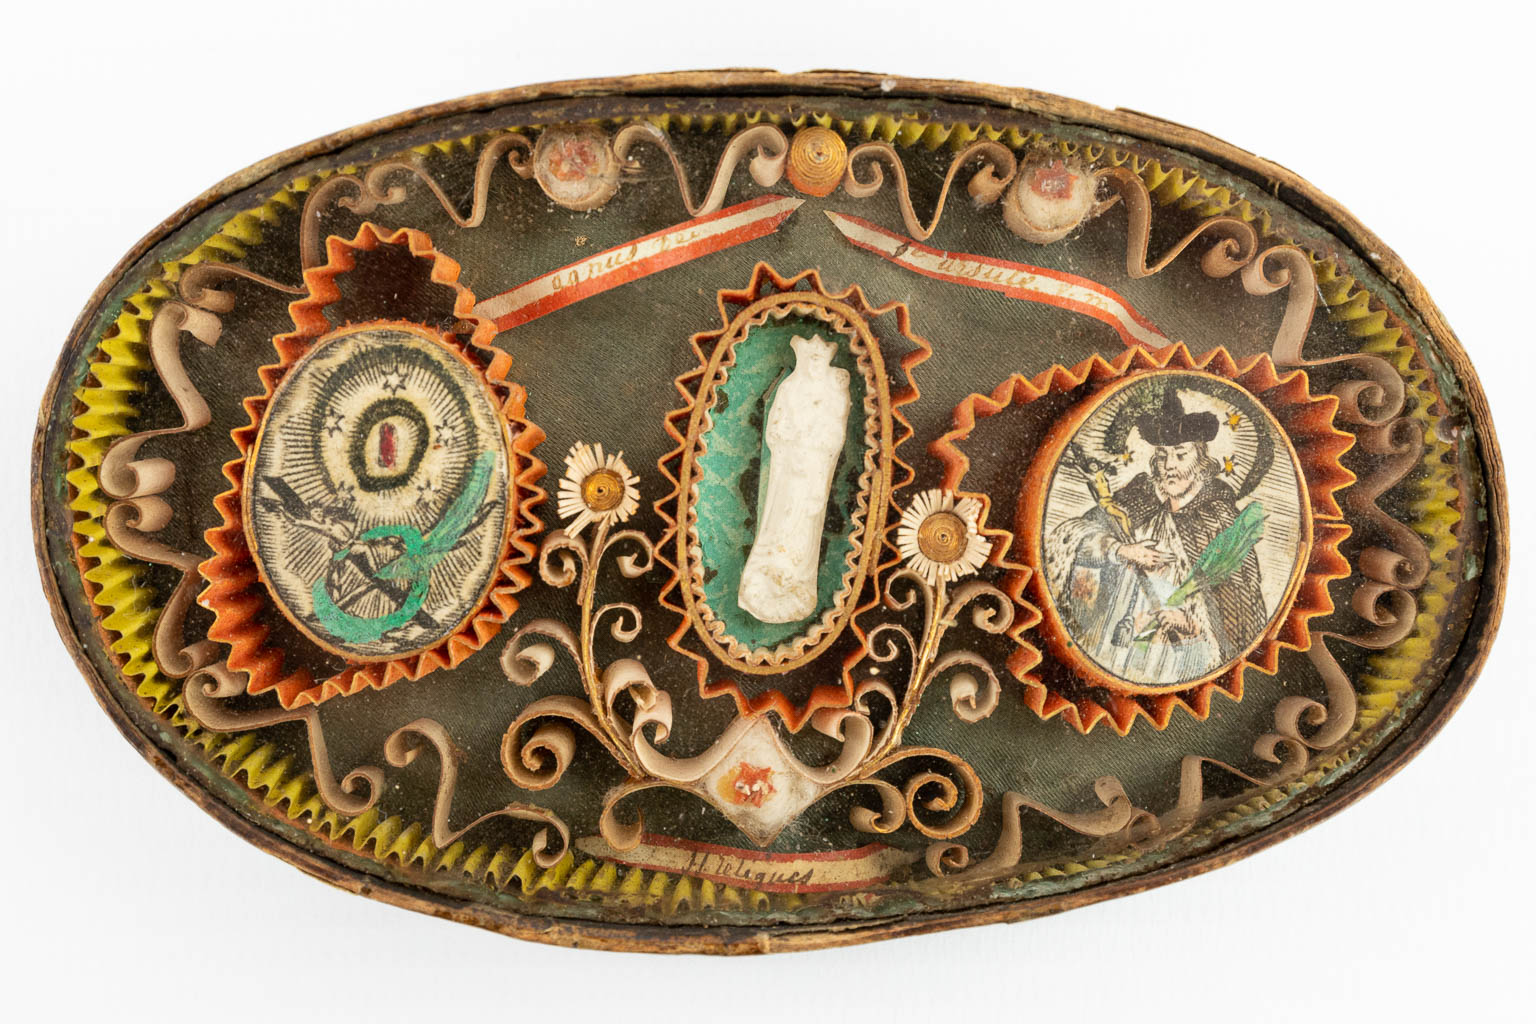 An antique relic in an oval box, marked Agnus Dei, H Reliques. - Image 6 of 11